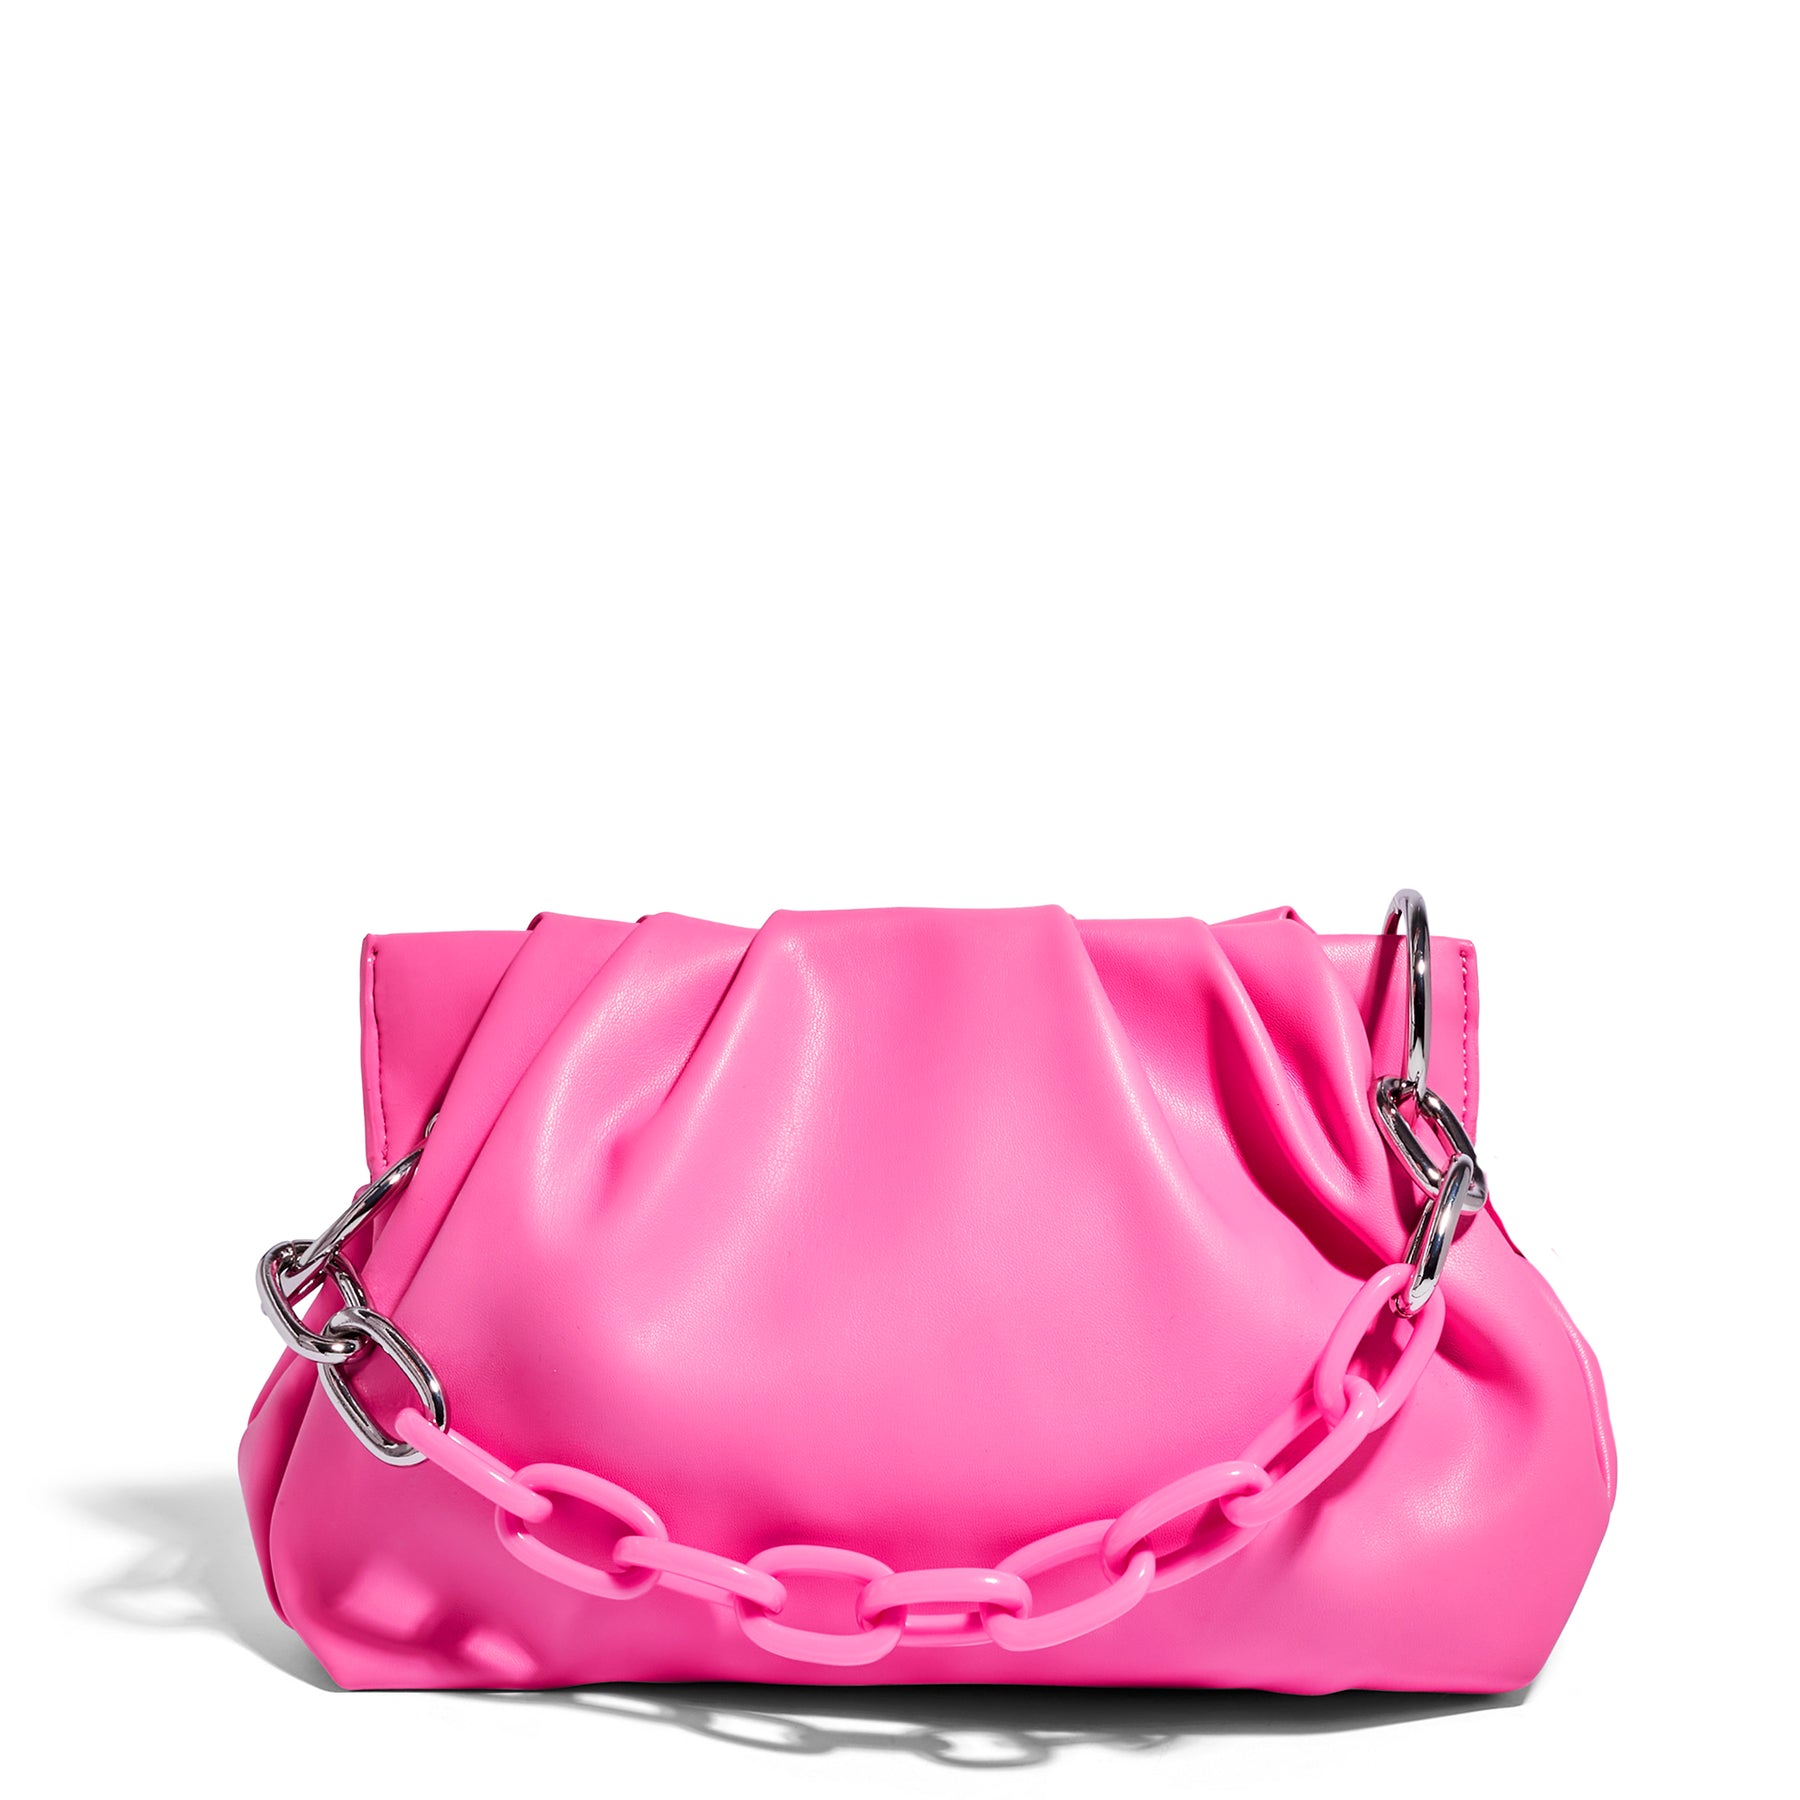 House Of Want | Chill Framed Clutch Taffy Pink – House of Want